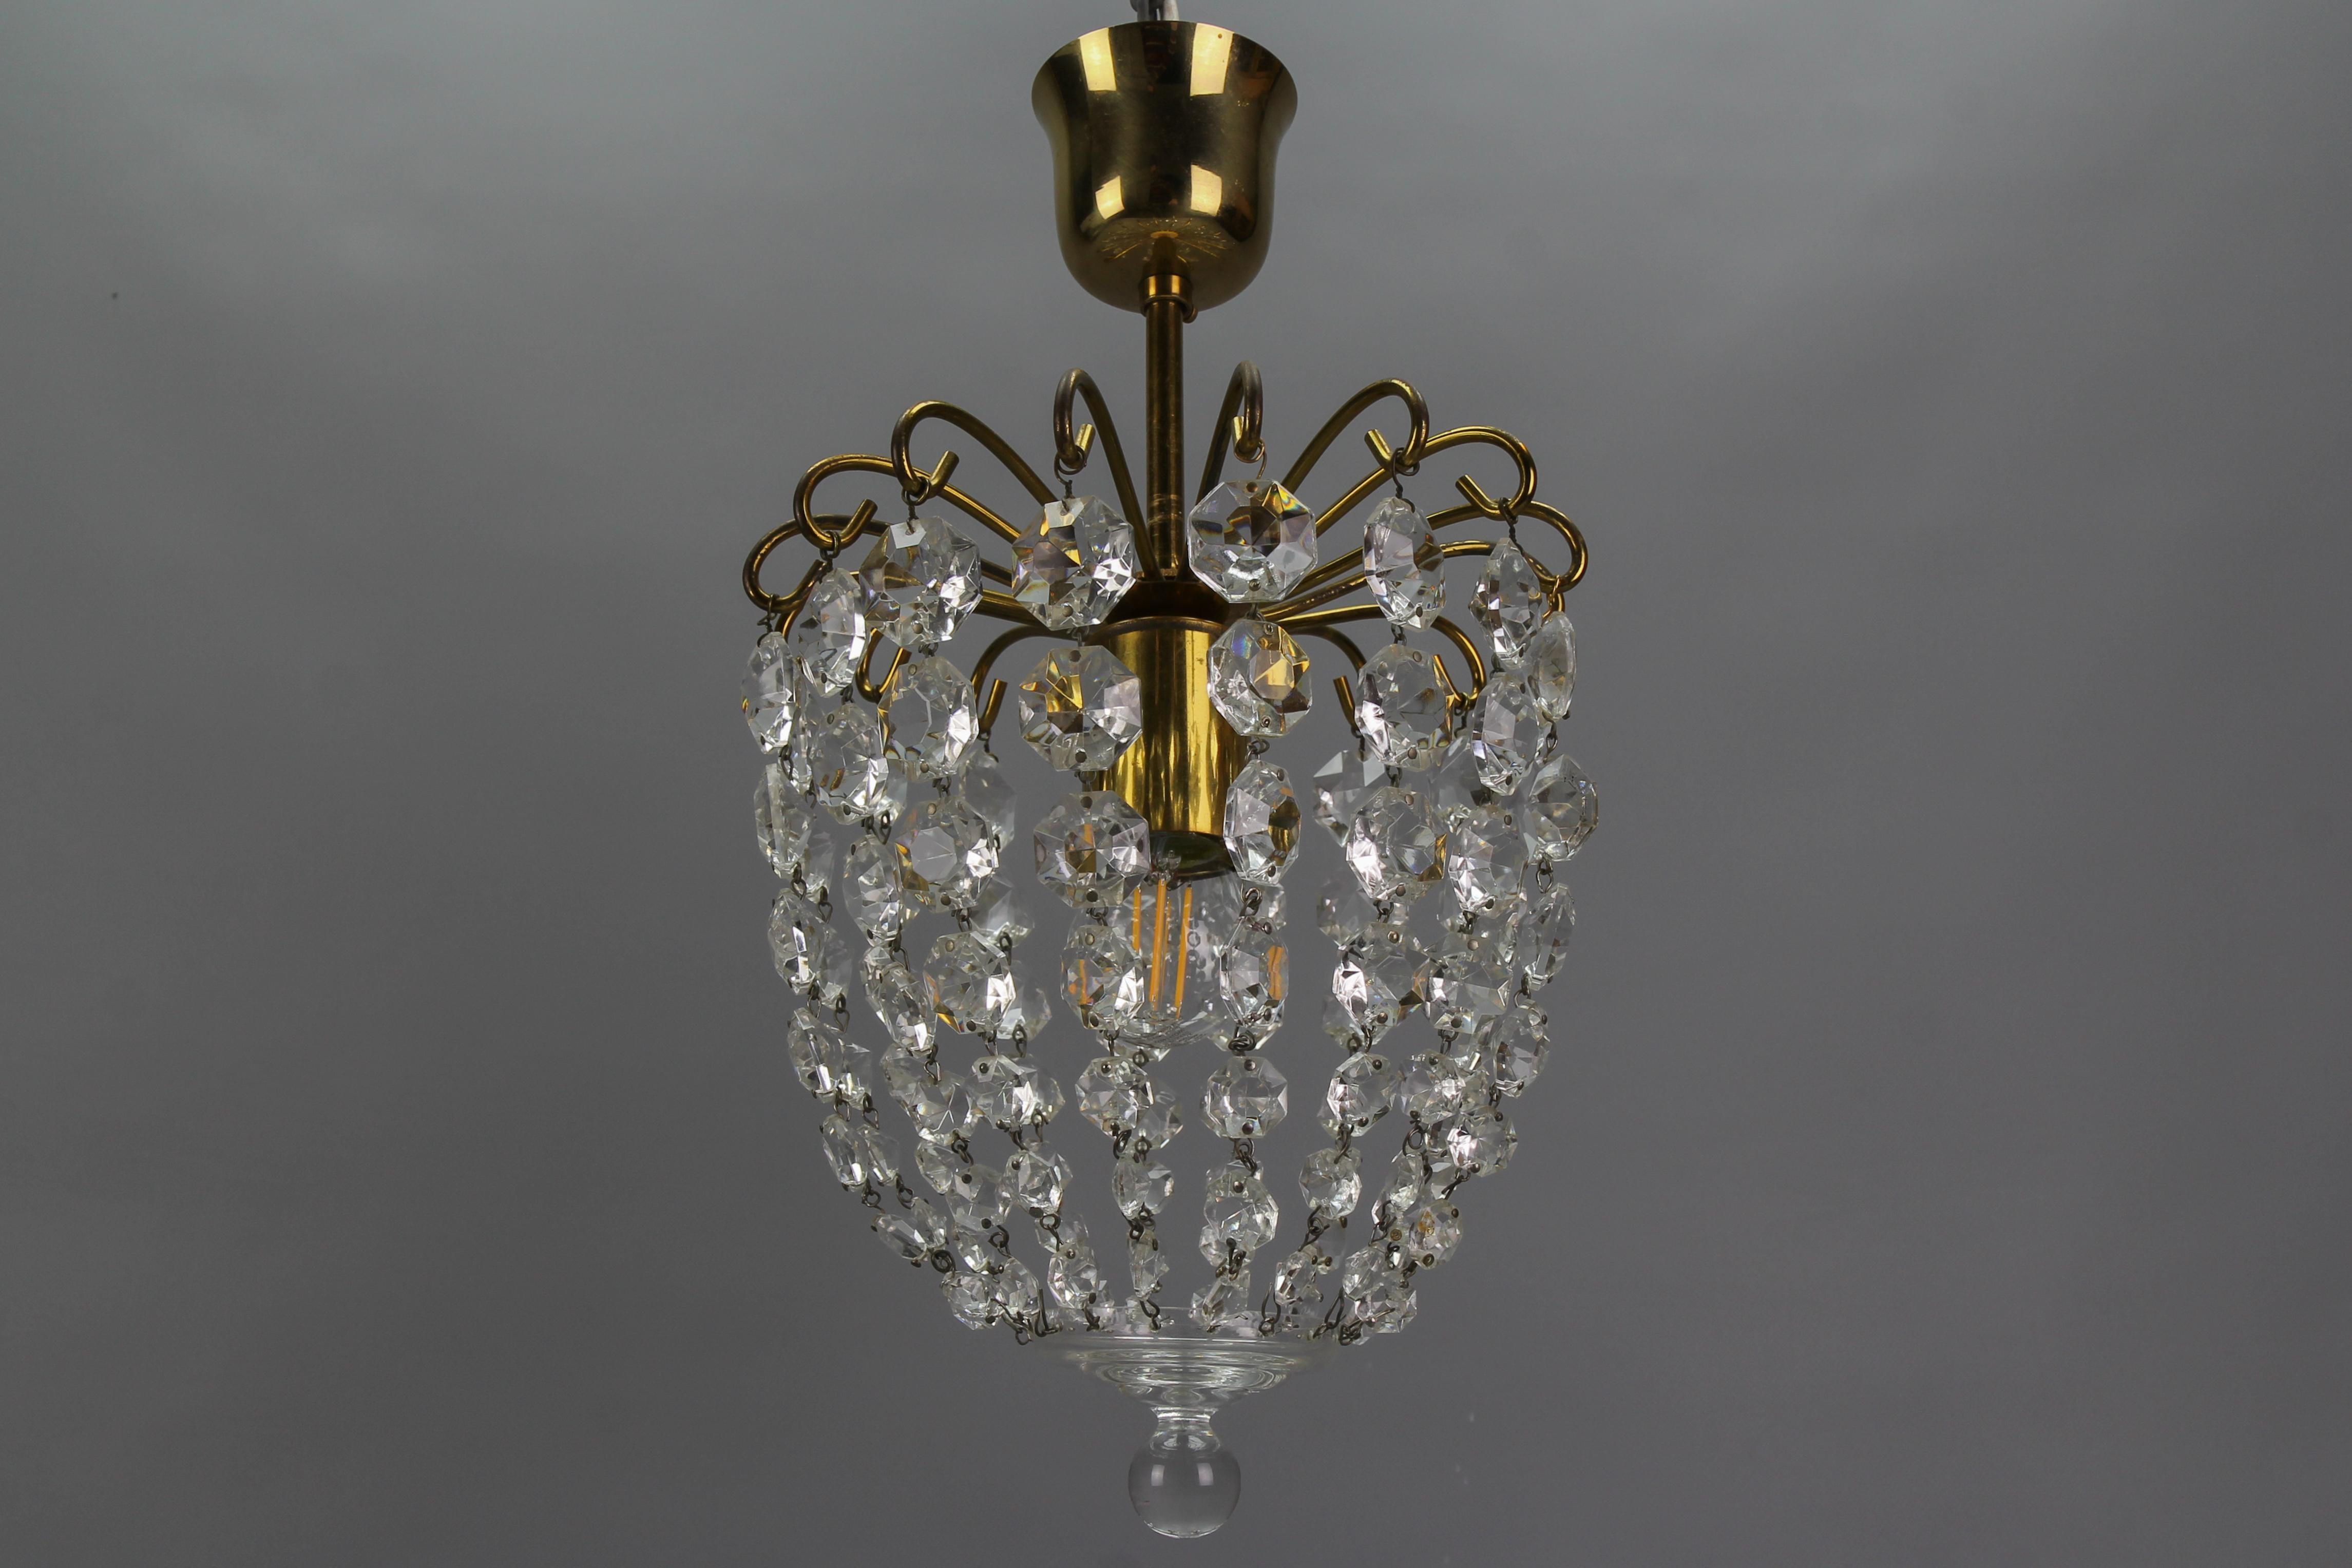 Crystal glass and brass ceiling light from circa the 1970s, Germany.
Adorable and compact basket-shaped single-light pendant chandelier attributed to Palwa (Palme & Walter).
One socket for E27 (E26) size light bulb.
Dimensions: height: 33 cm / 13